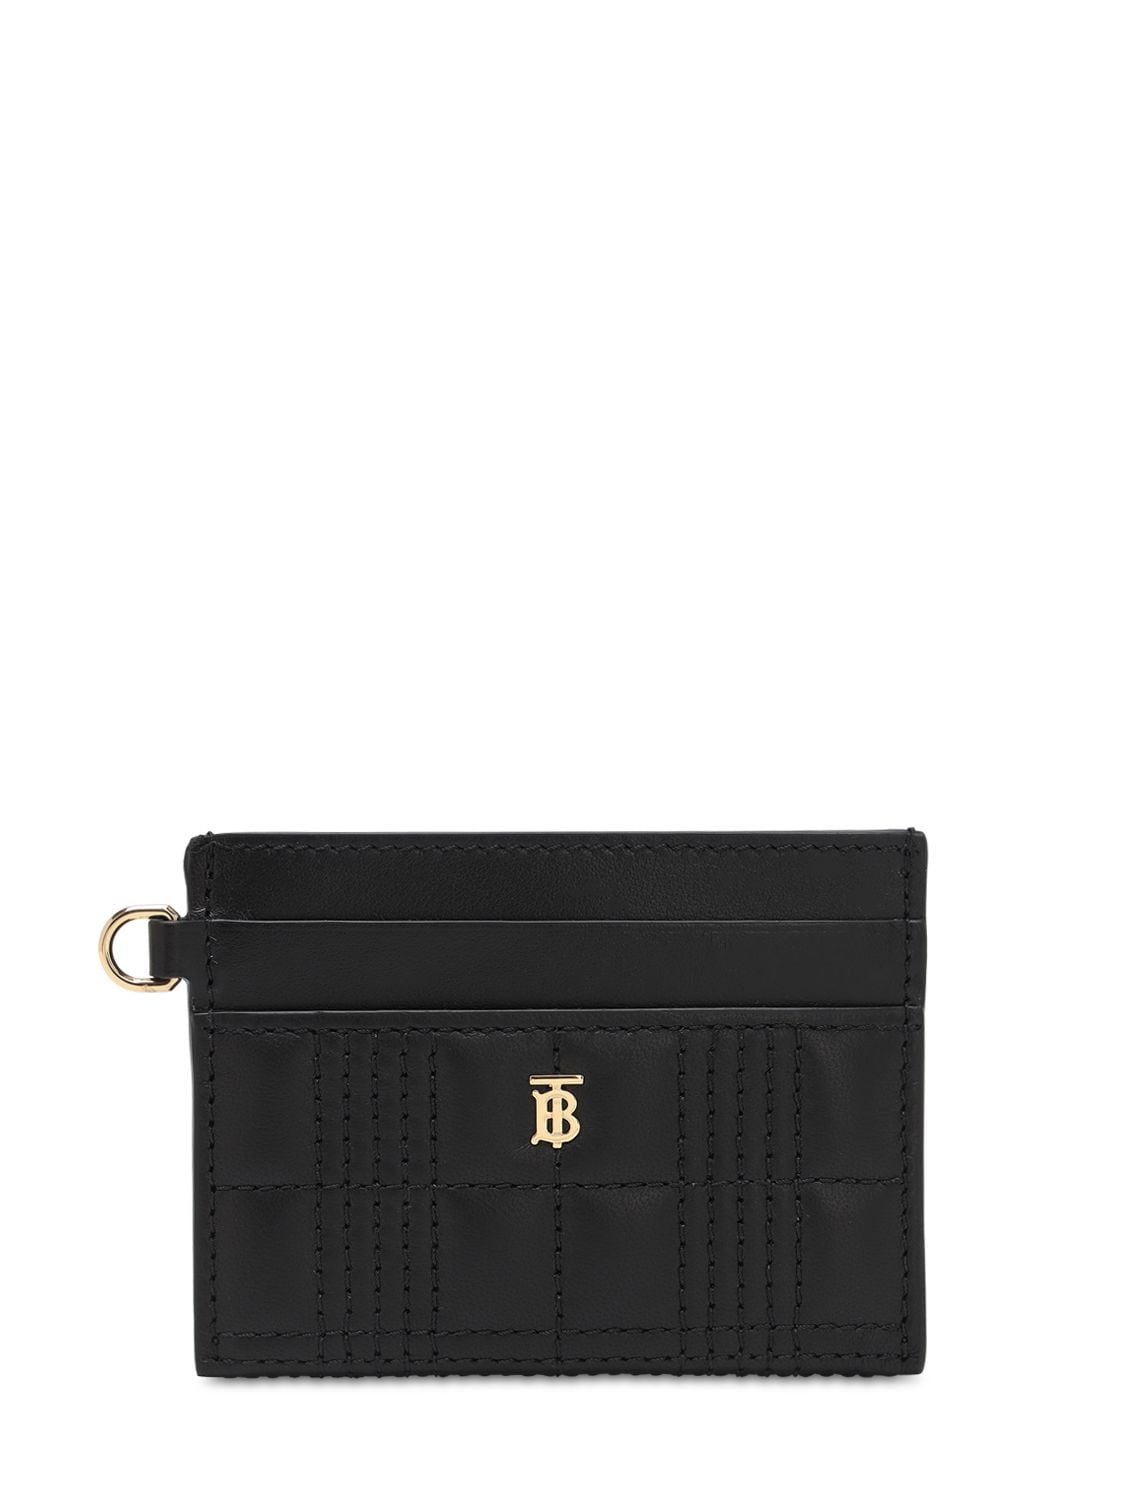 BURBERRY SANDON QUILTED LEATHER CARD HOLDER,72ID1H065-QTEXODK1